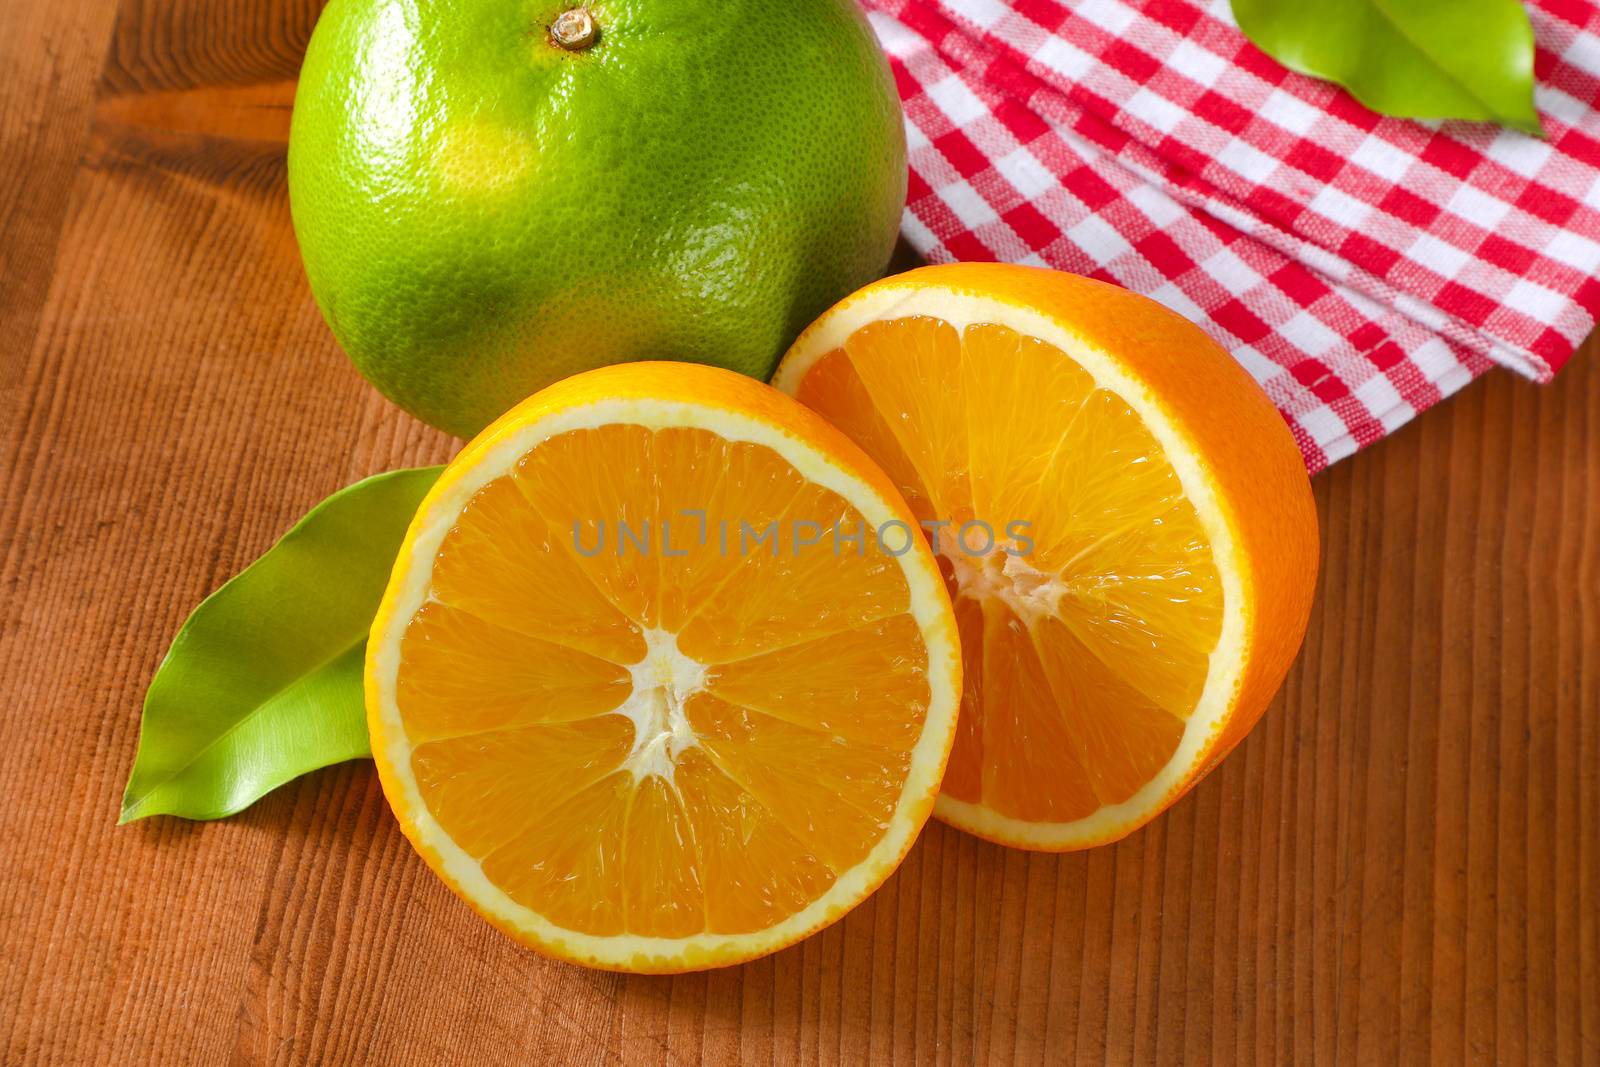 Green grapefruit (sweetie, pomelit, oroblanco), two orange halves and checked red and white tea towel on wooden table